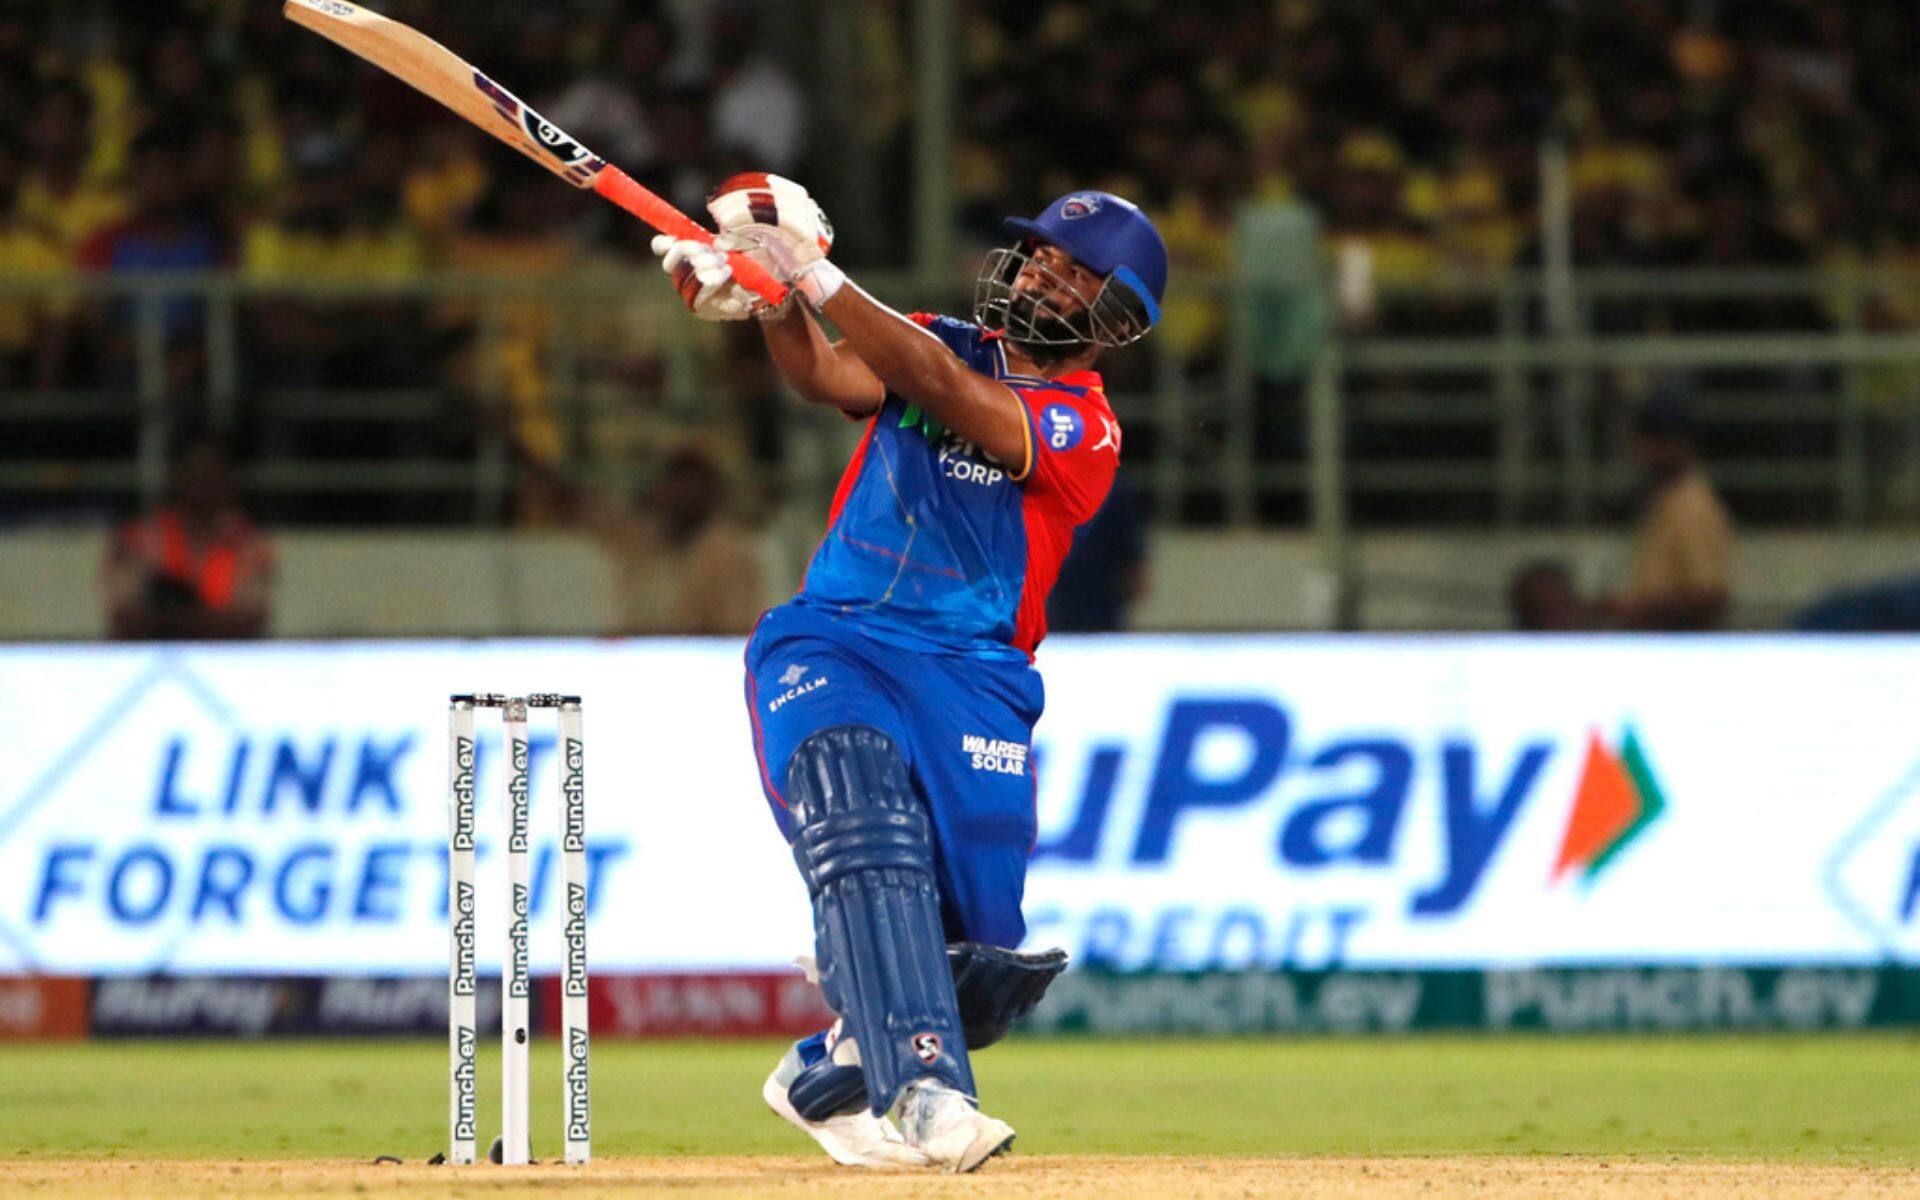 Pant is looking in fine touch in his comeback tournament after accident (AP)